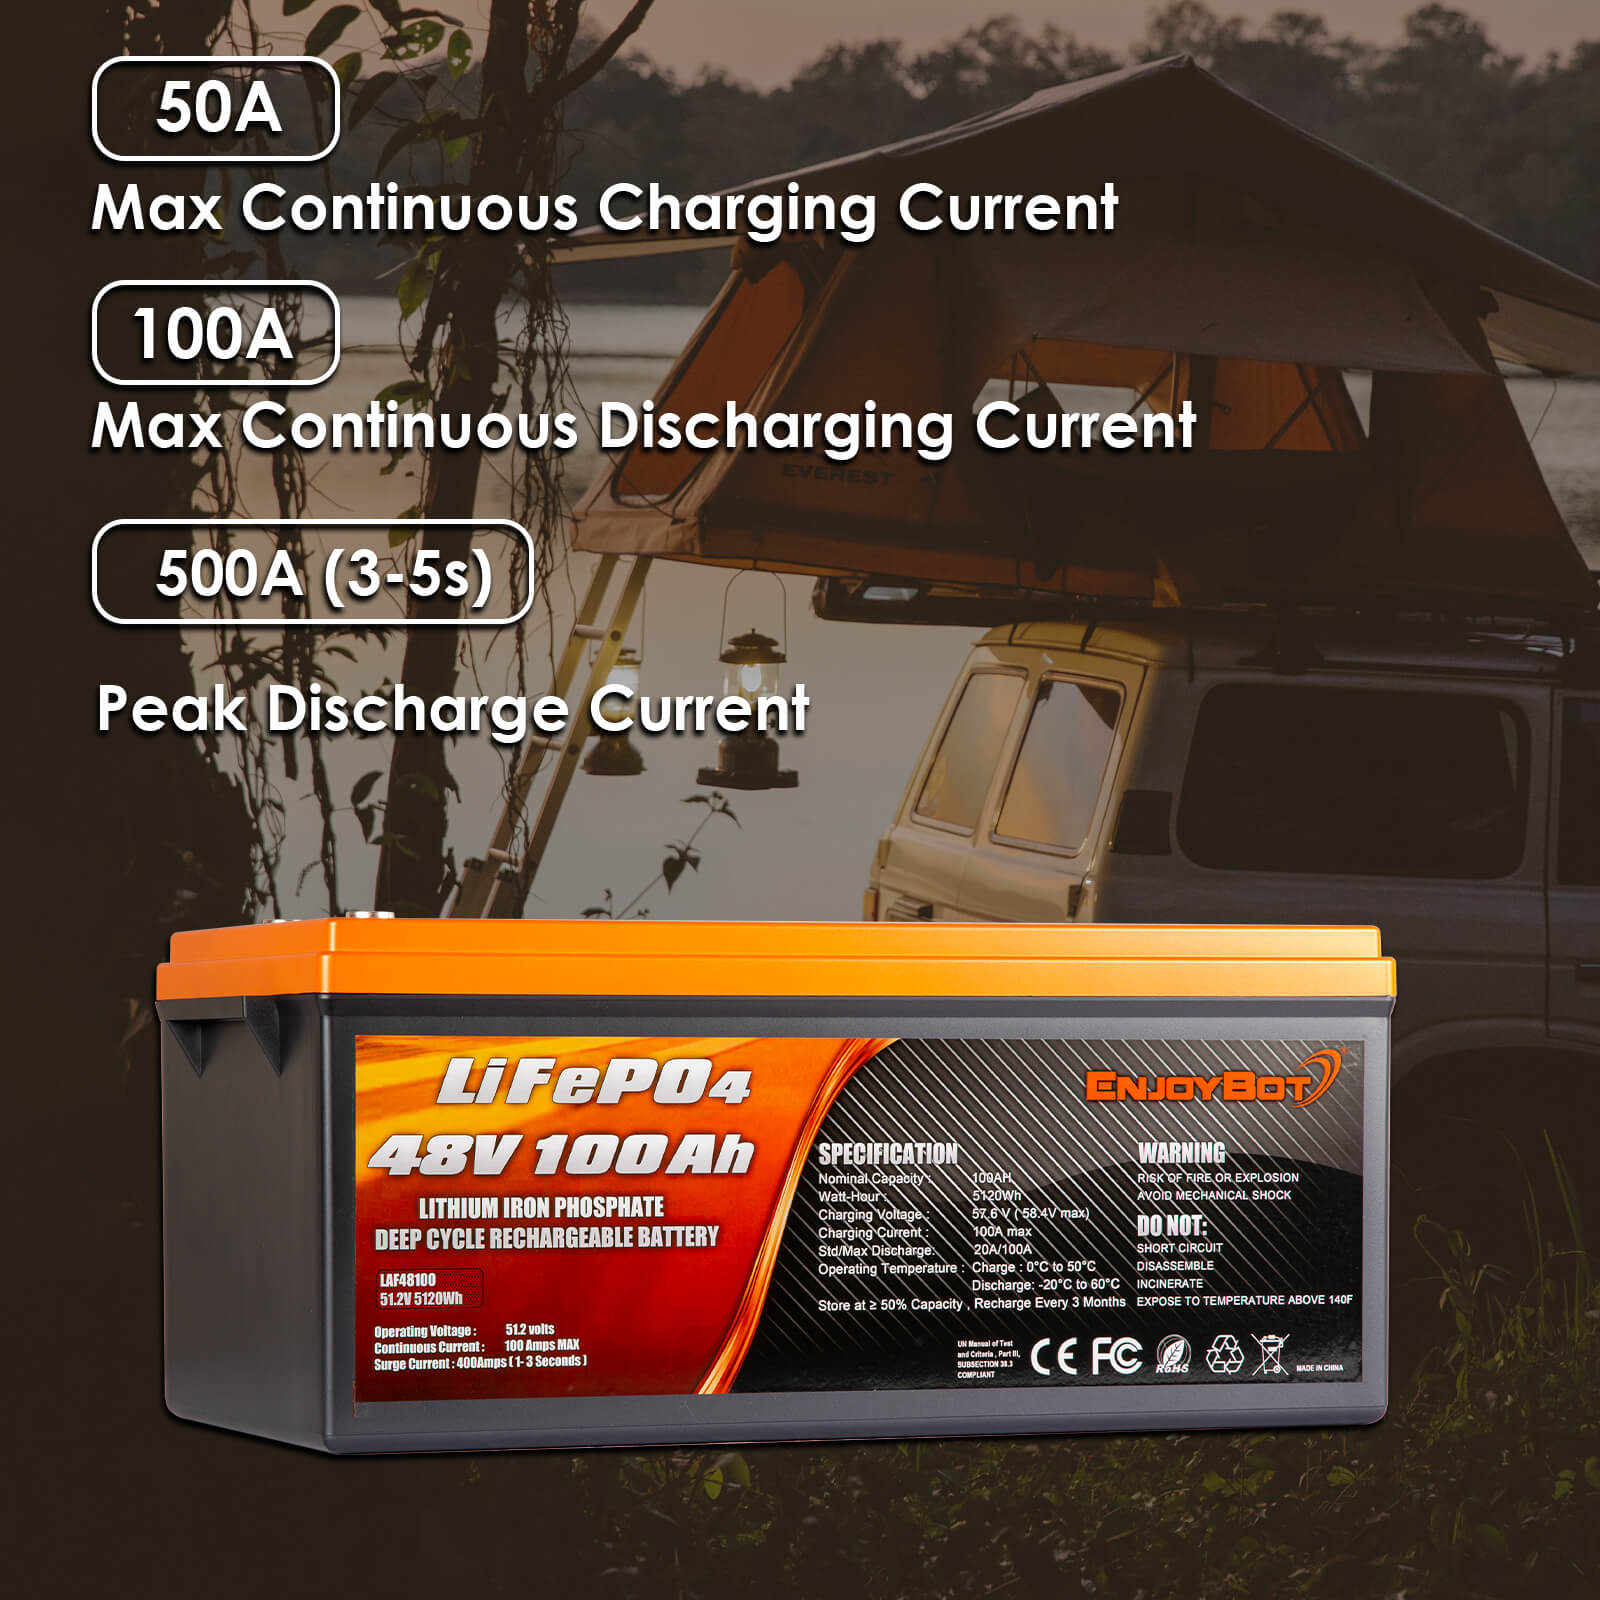 ENJOYBOT Bluetooth 48V 100AH 5120Wh Smart Lithium Battery + Dedicated 10A battery charger